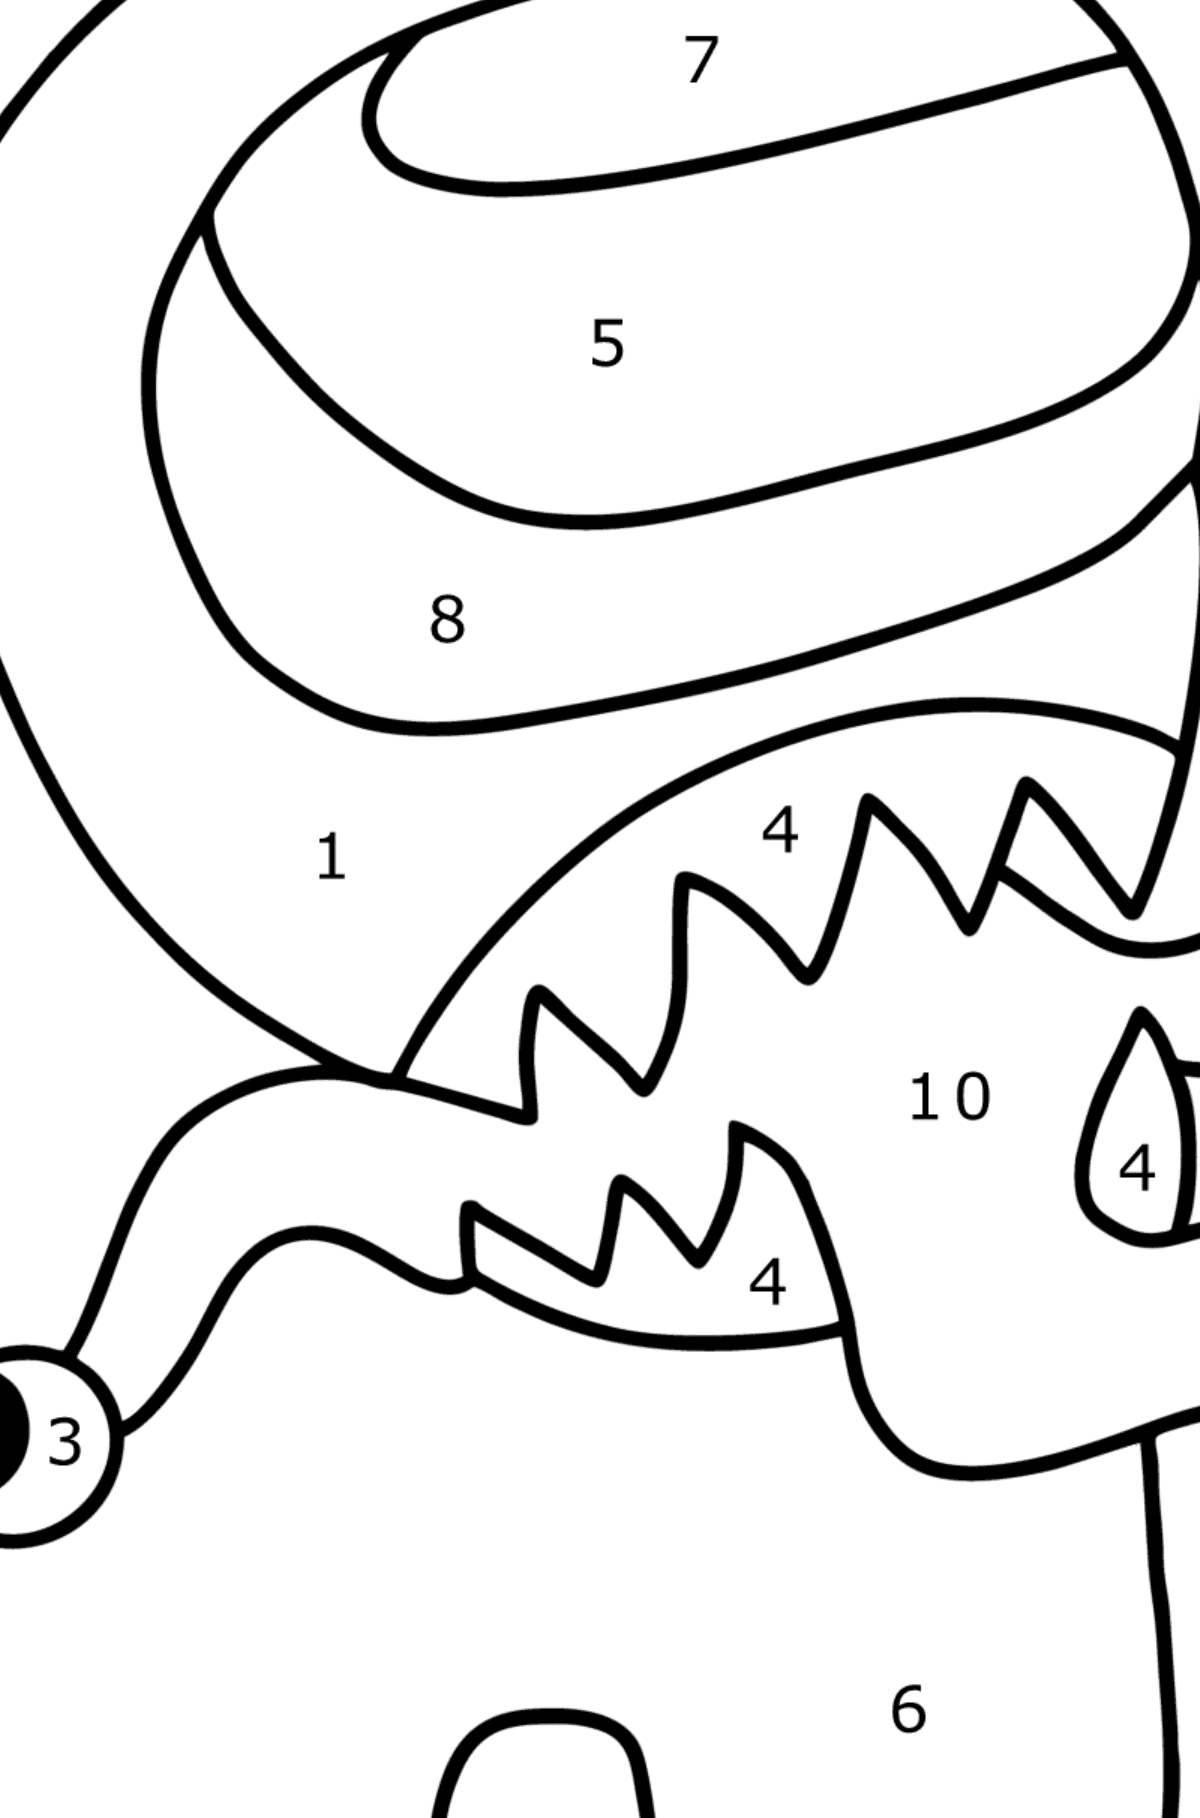 Among Us coloring page for Free - Coloring by Numbers for Kids